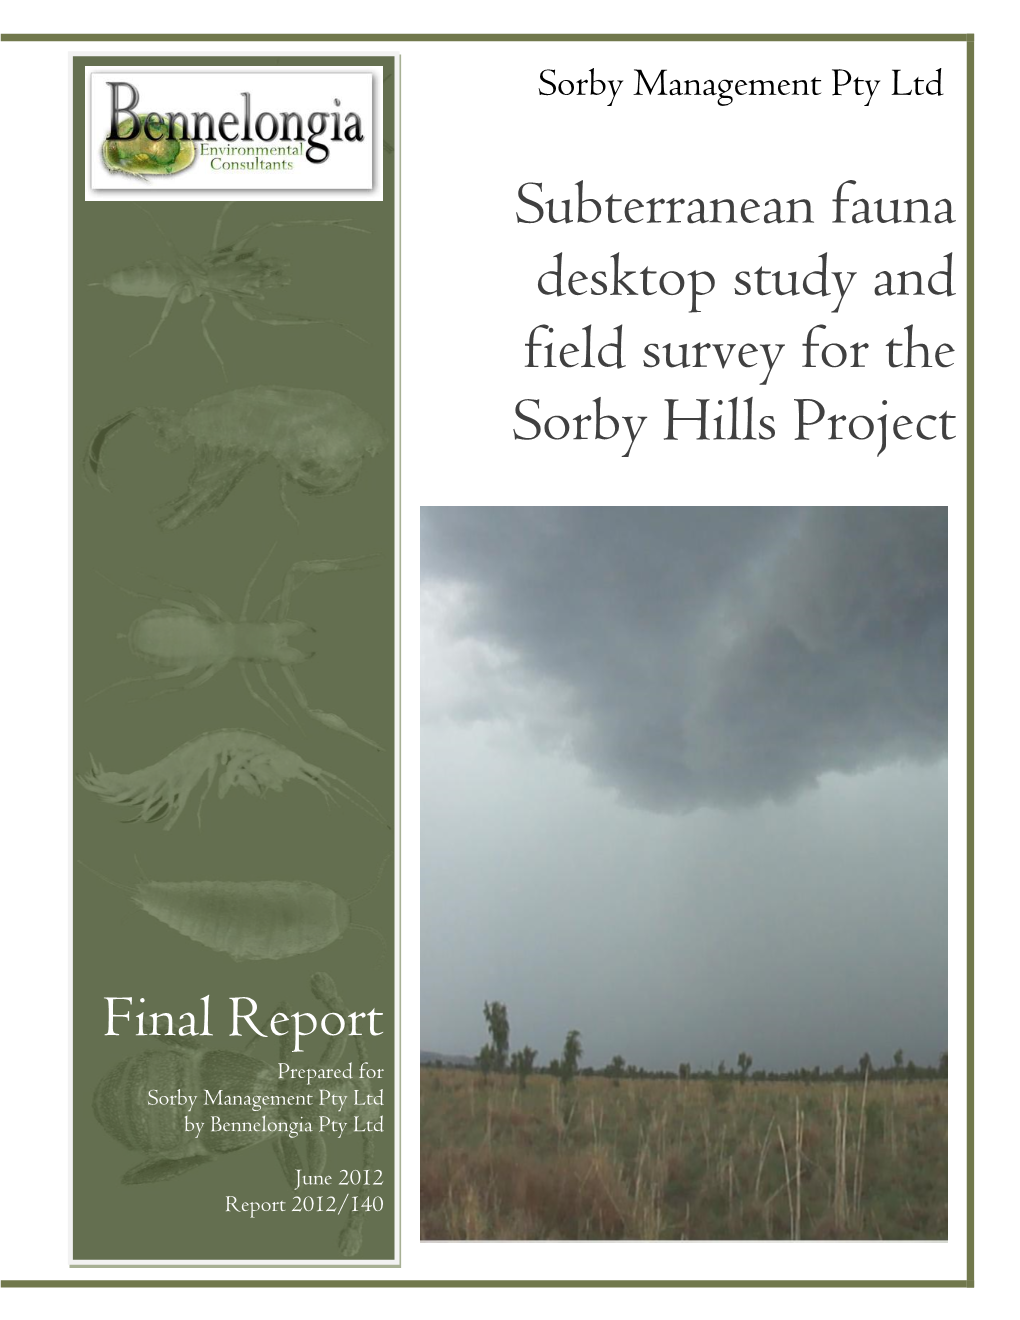 Subterranean Fauna Desktop Study and Field Survey for the Sorby Hills Project